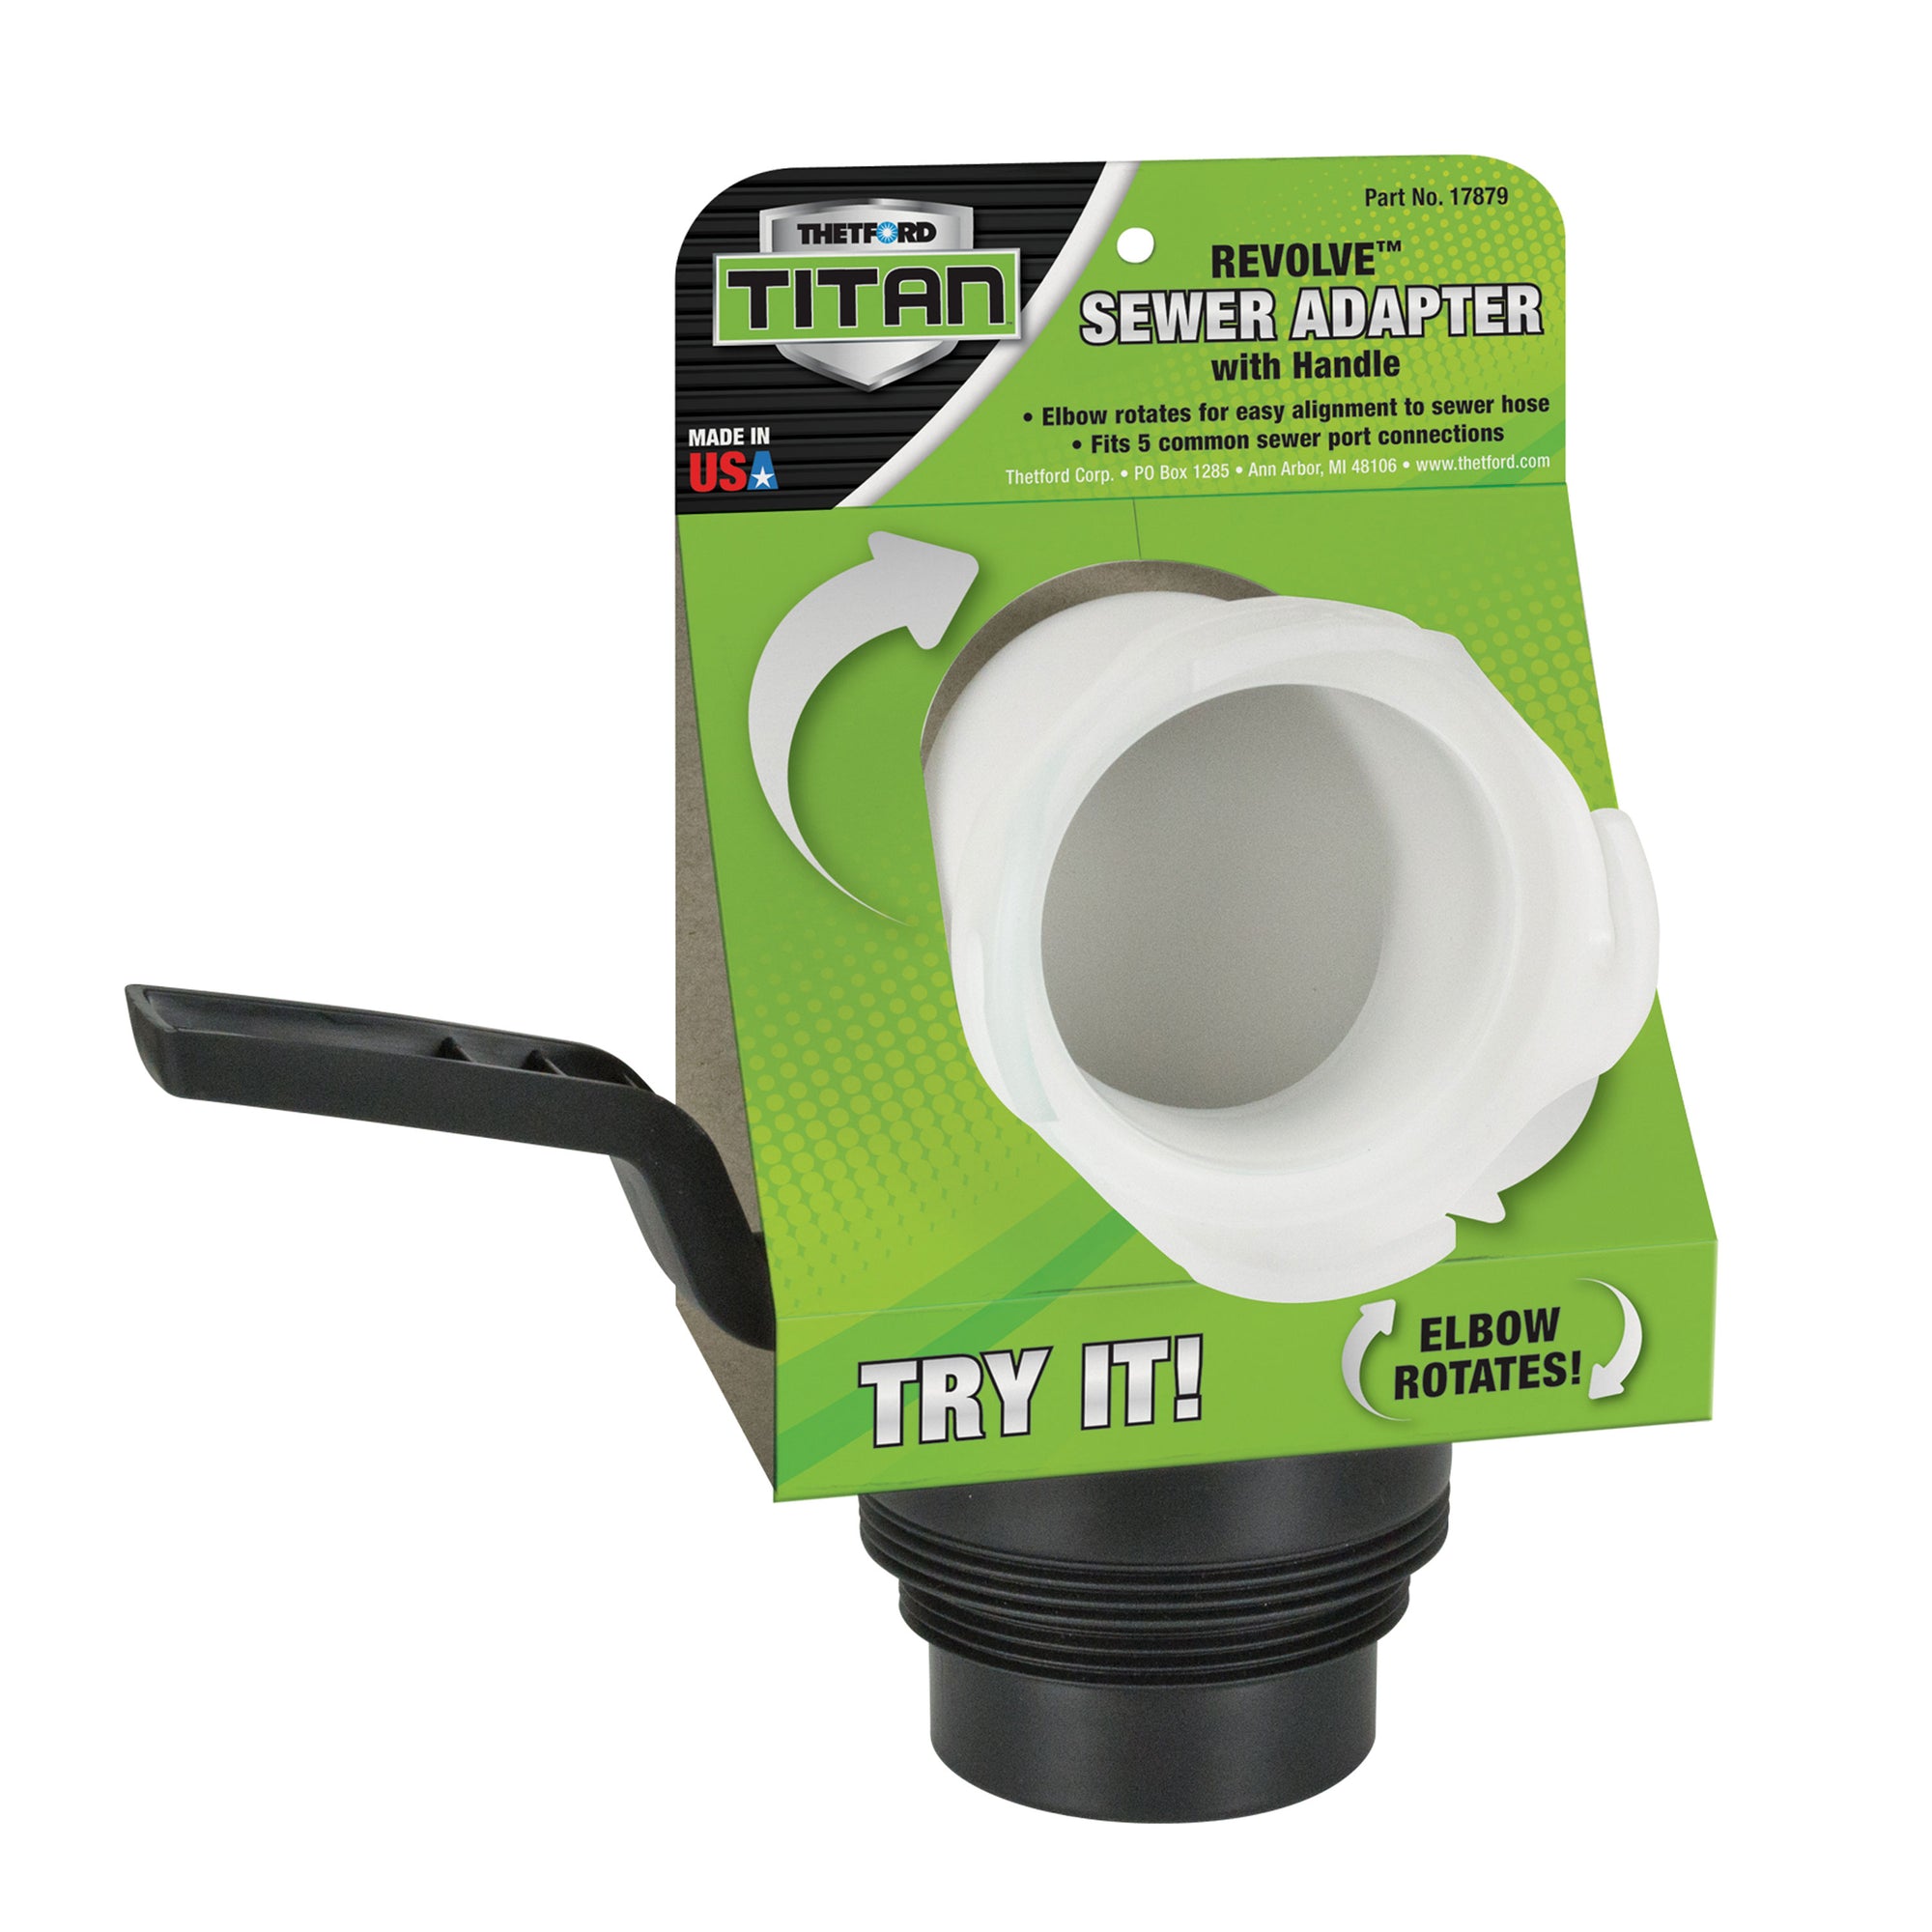 Thetford 17879 Titan Revolve Sewer Adapter with Handle